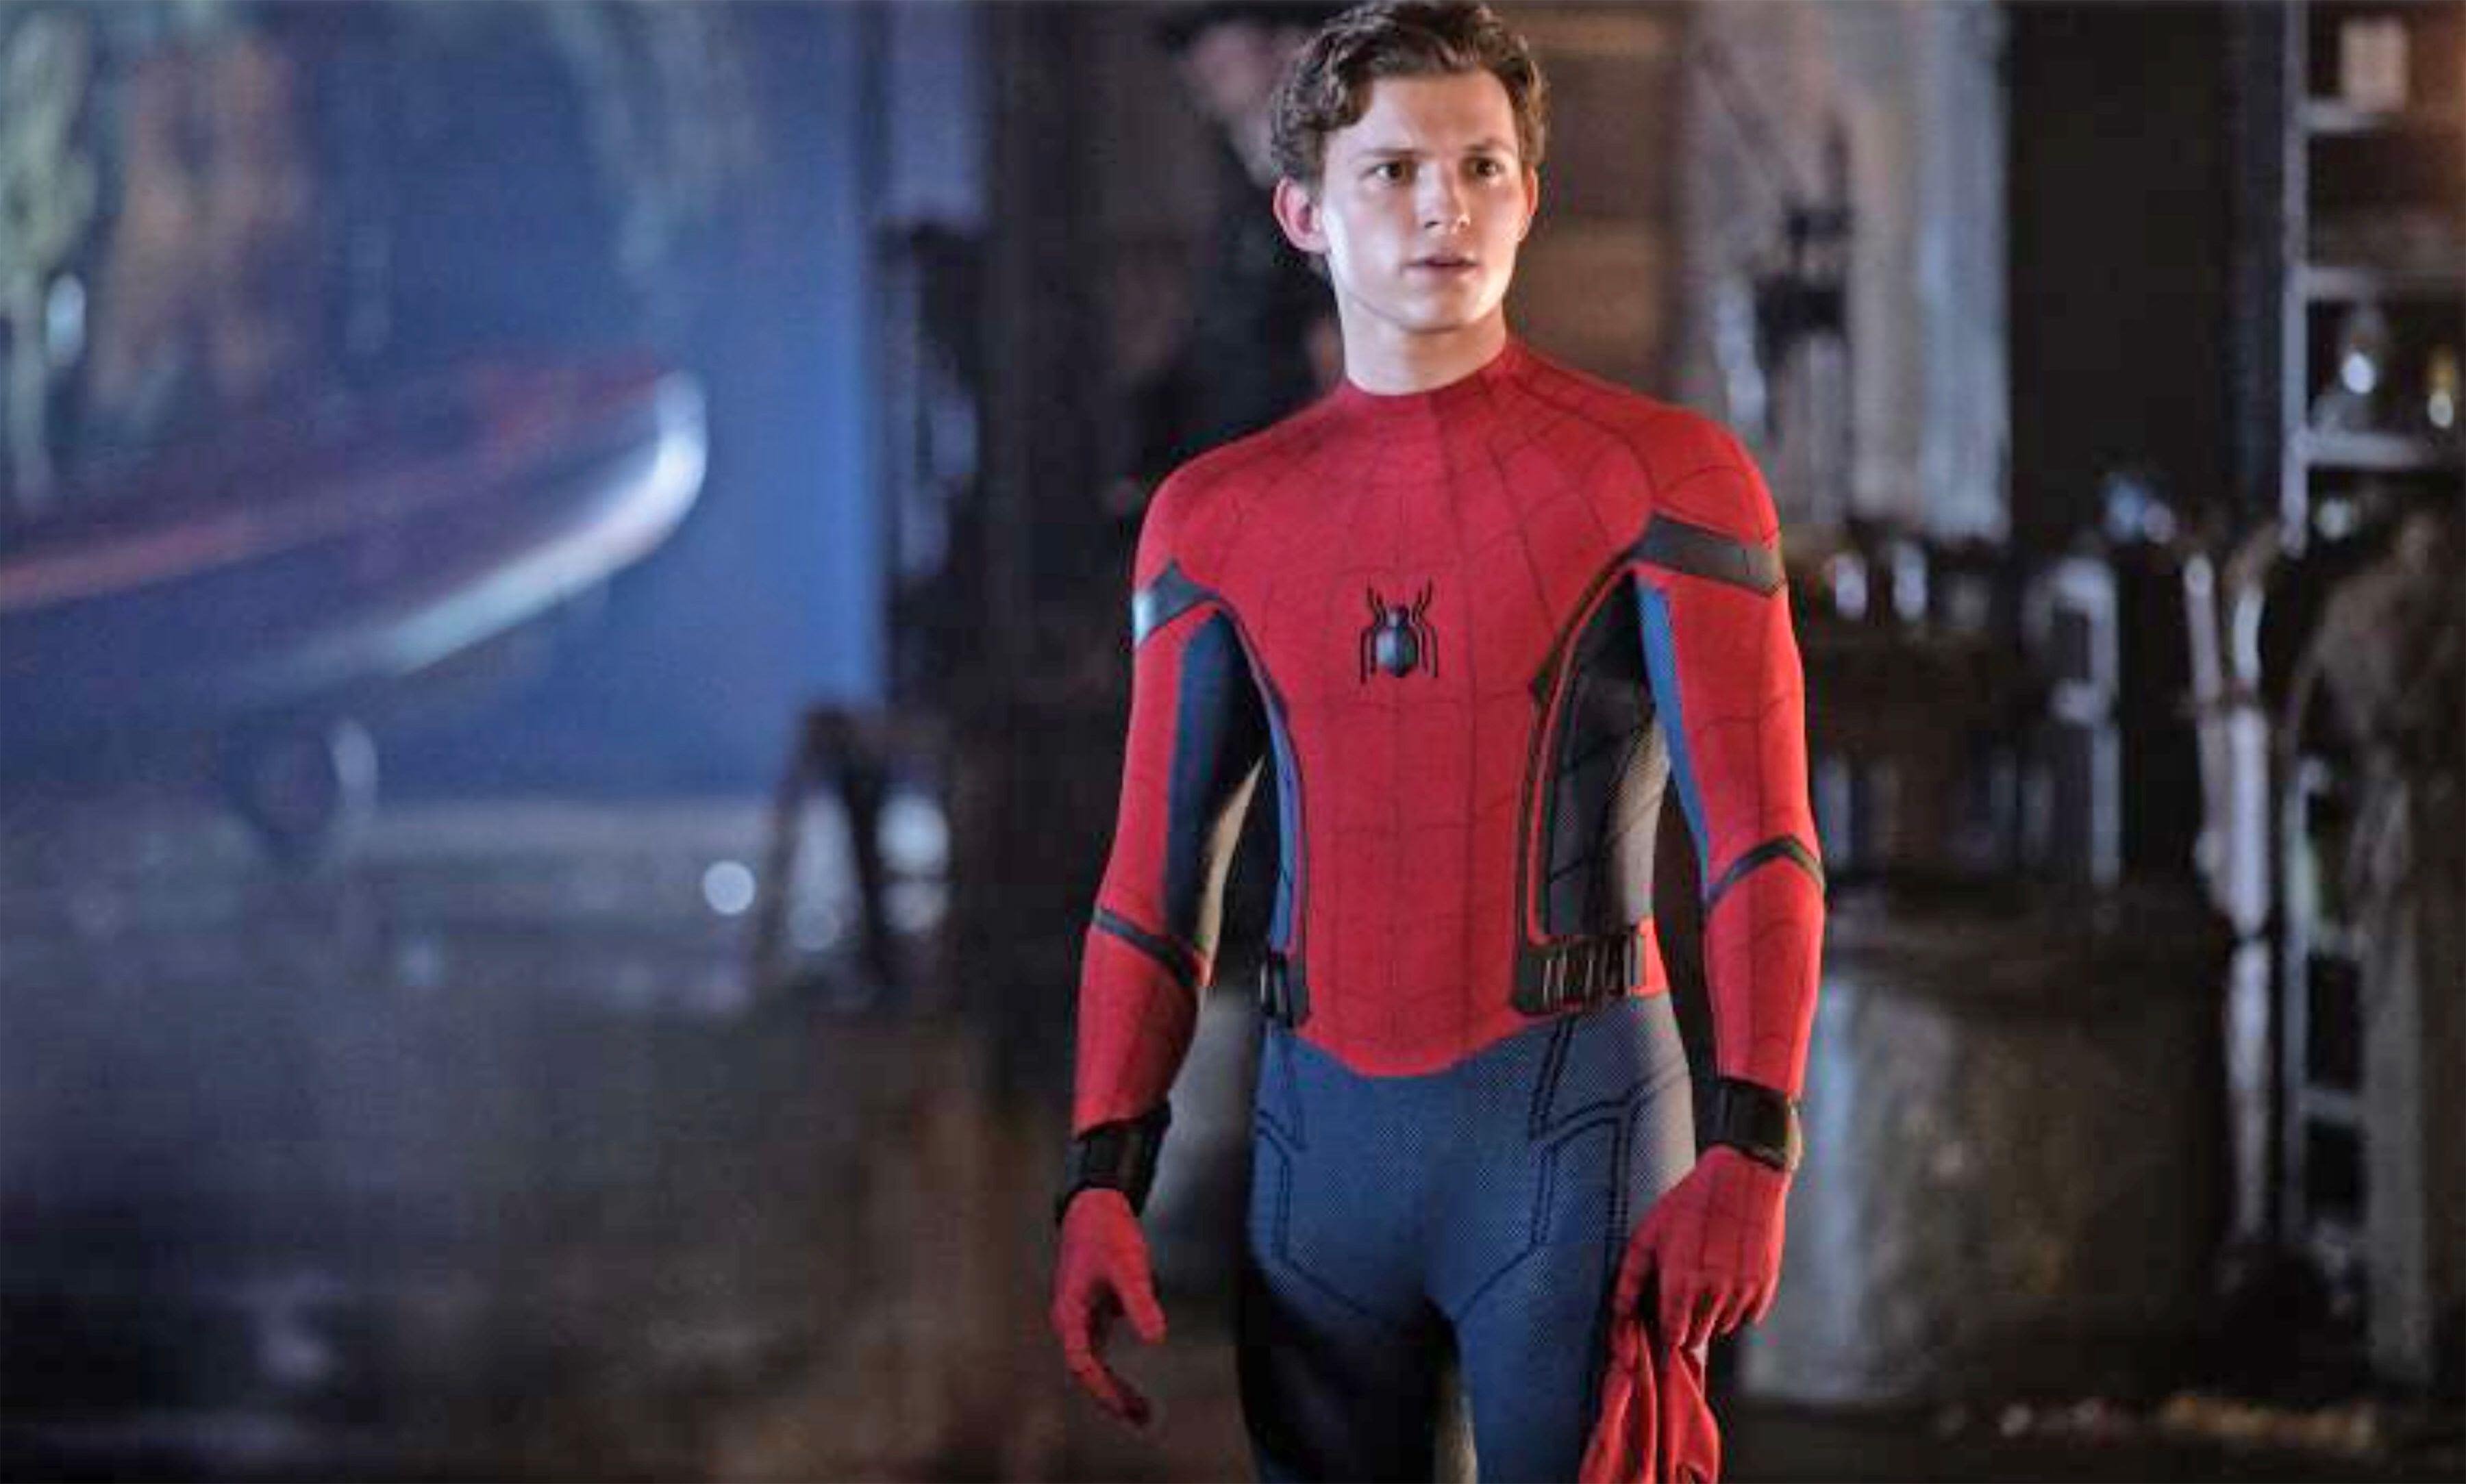 Tobey Maguire And Andrew Garfield Contributed More To Spider-Man